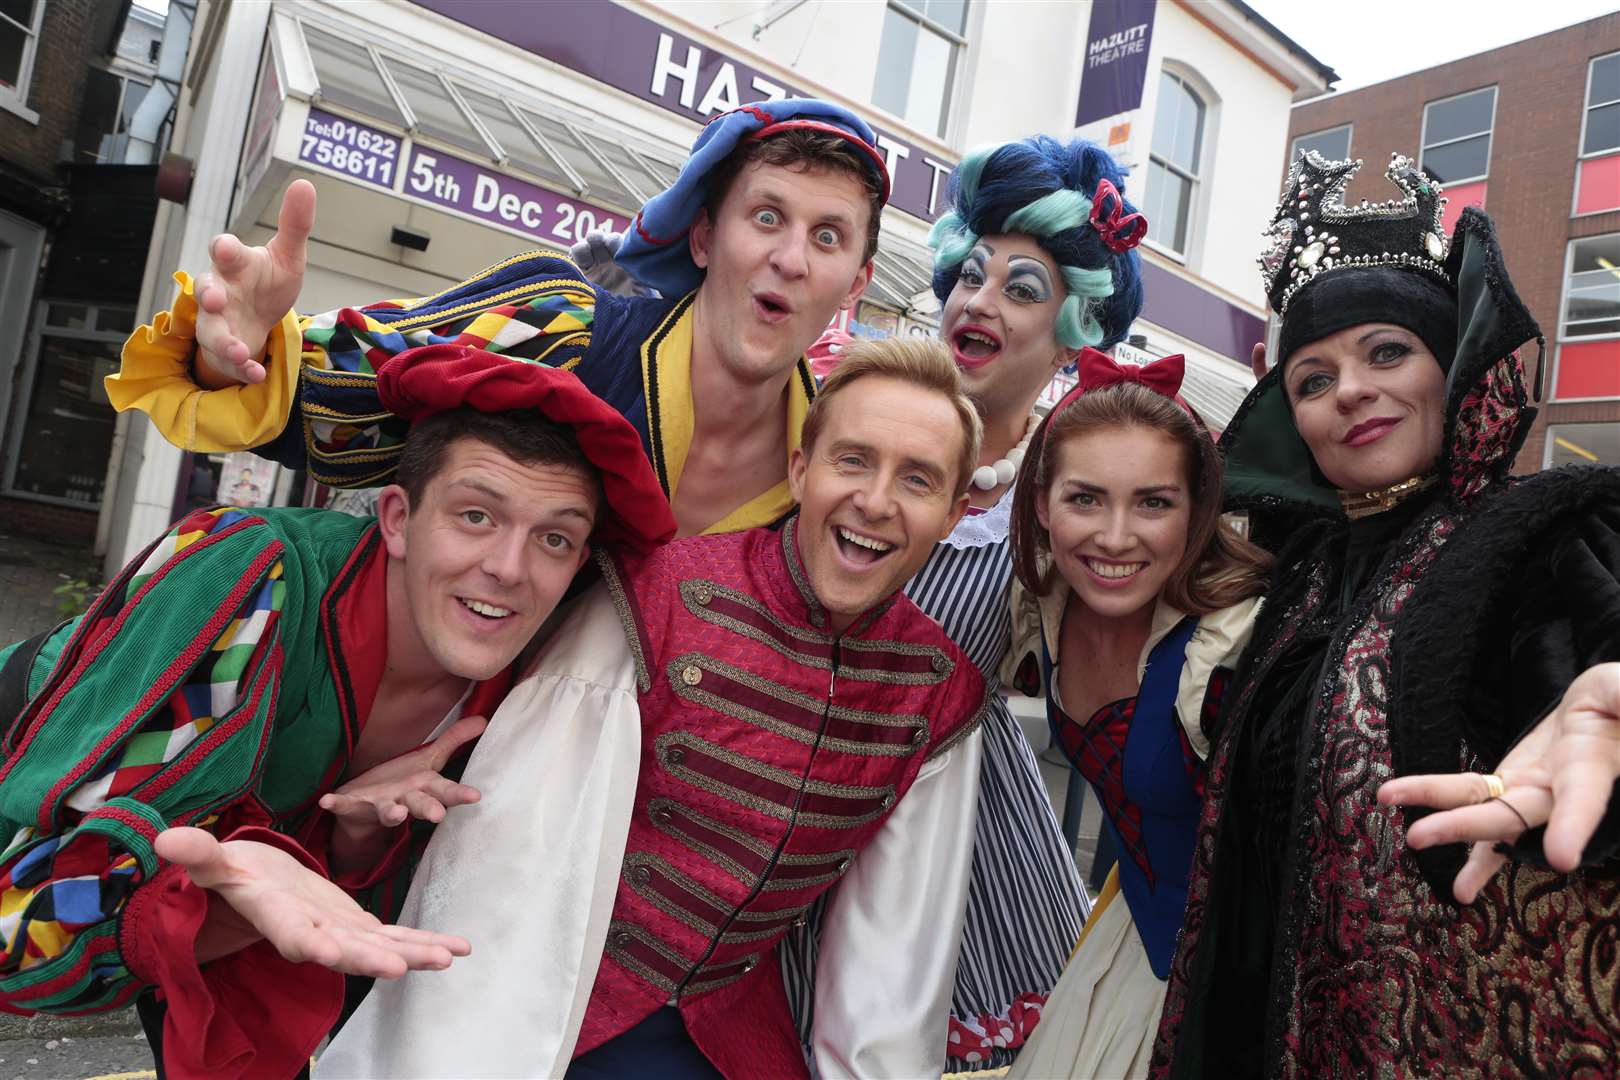 Some of the cast of Snow White and the Seven Dwarfs outside the Hazlitt